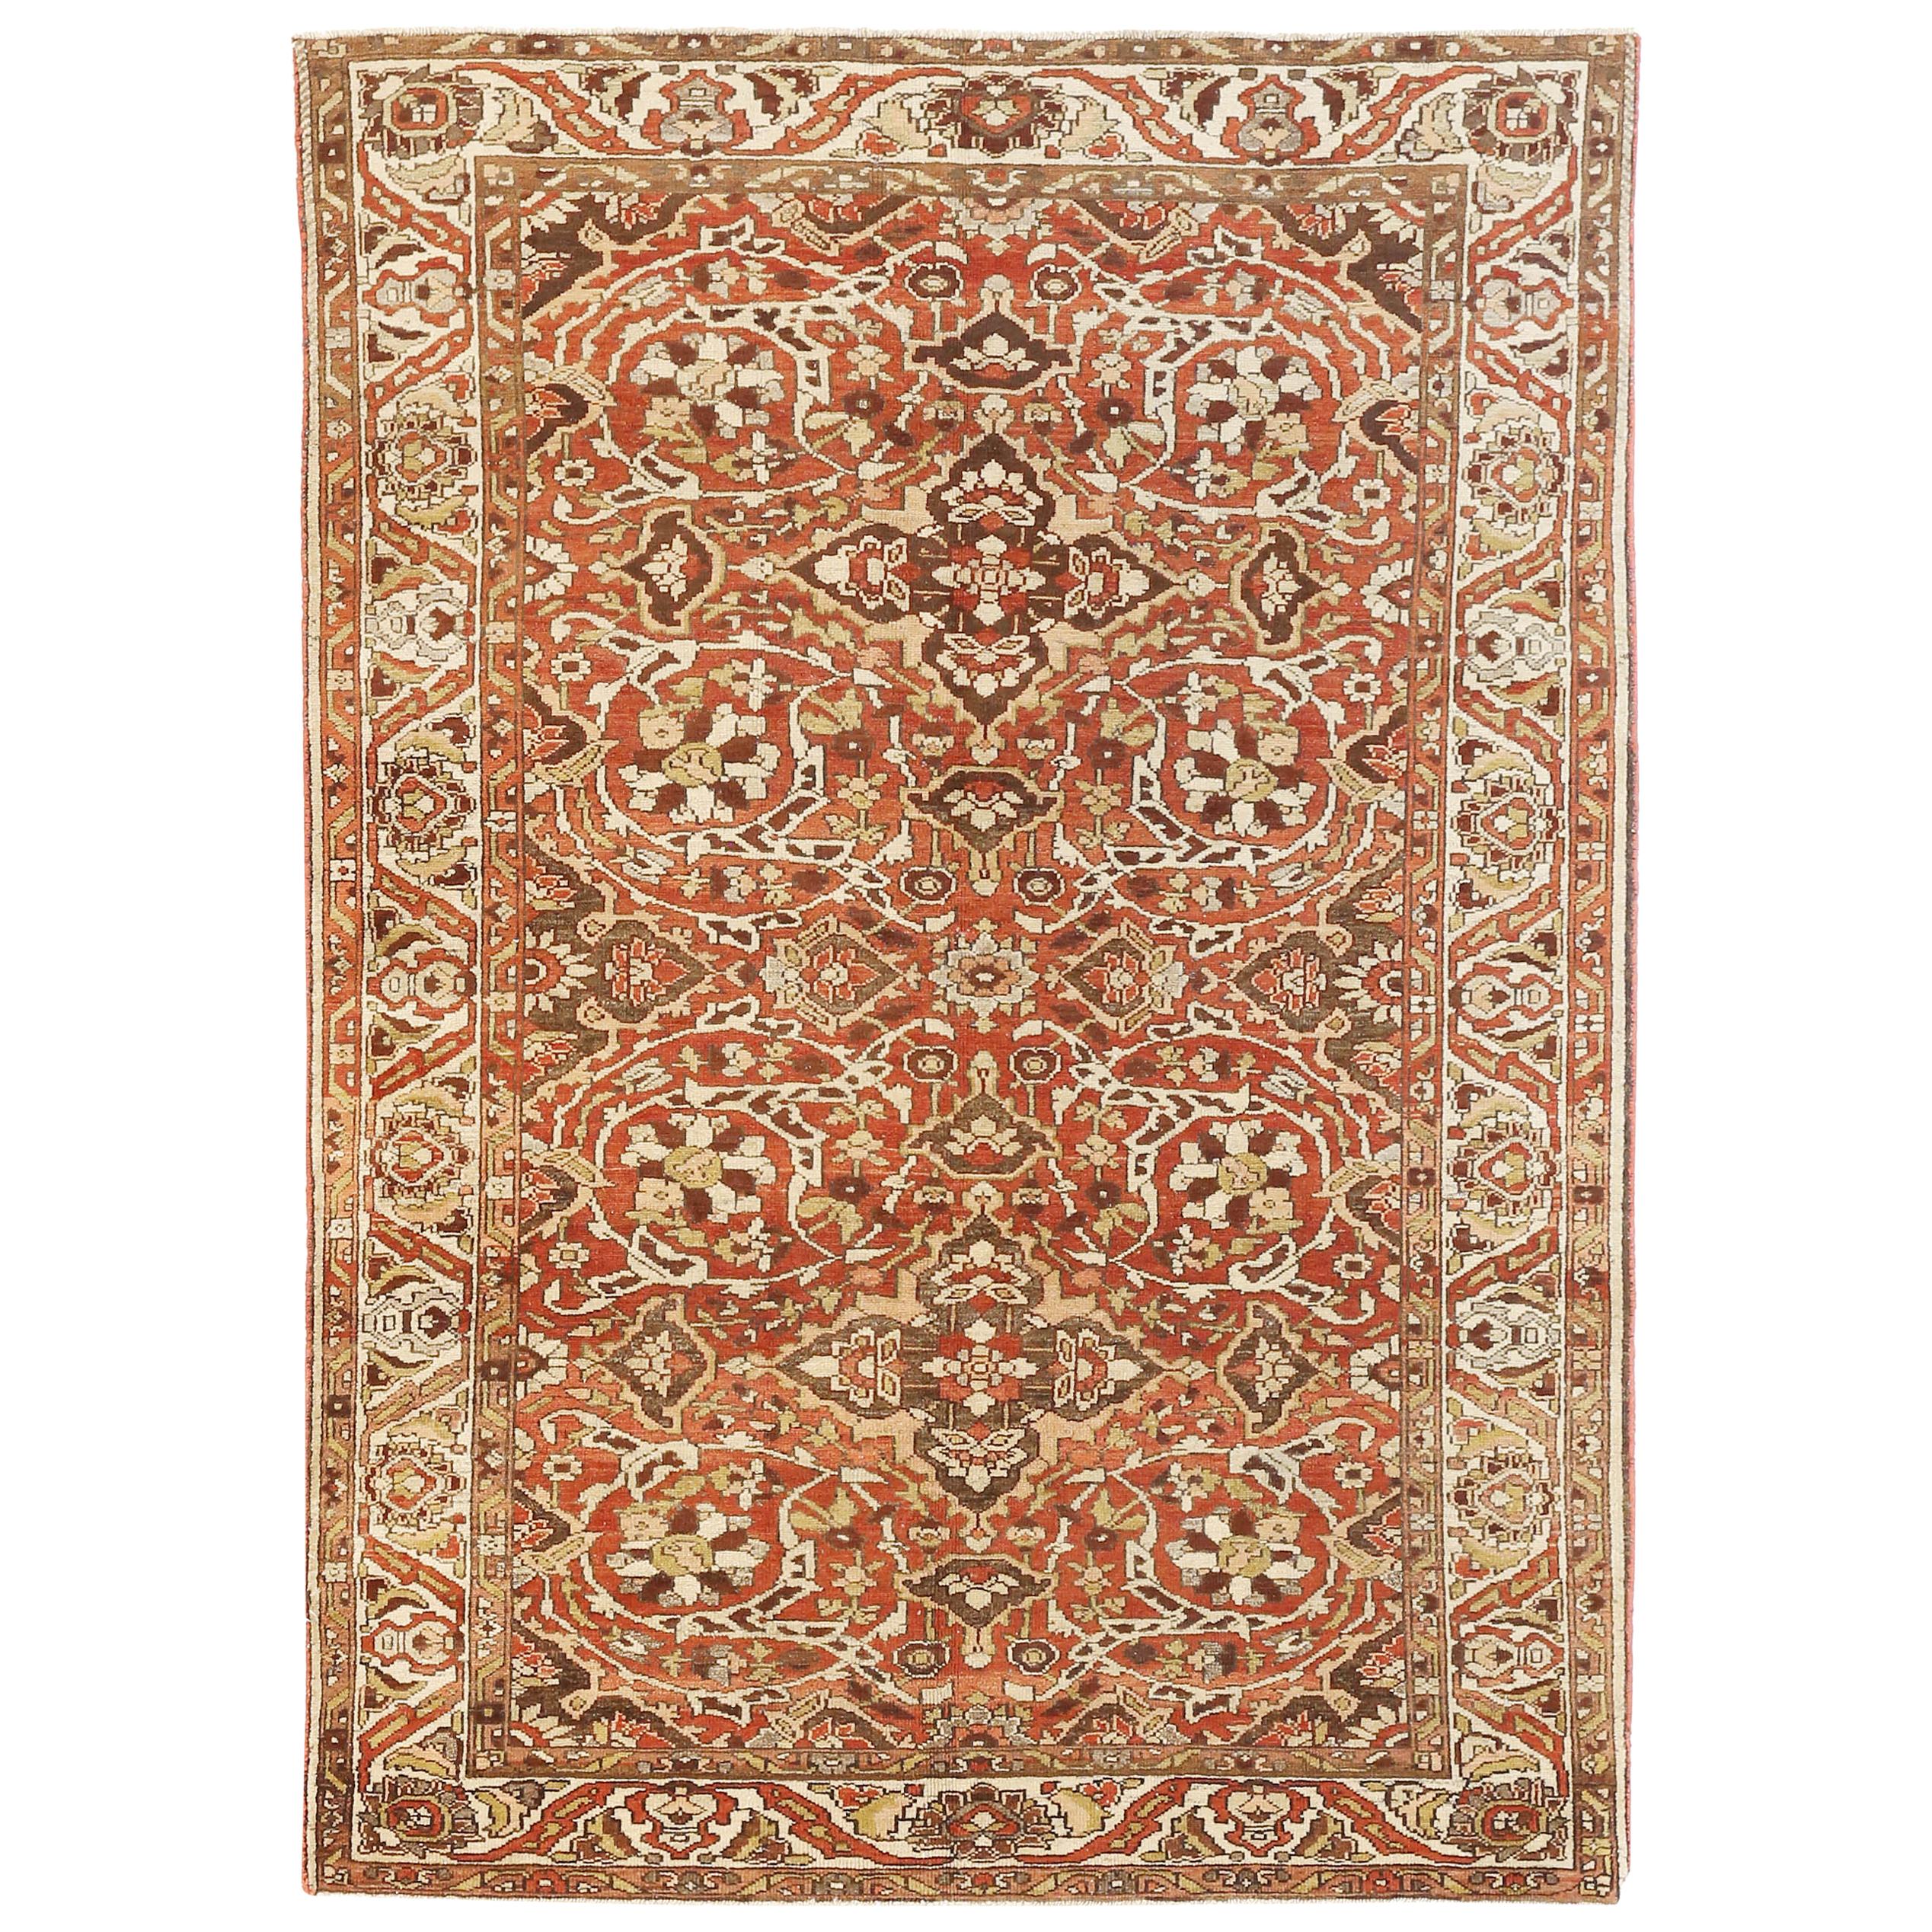 Antique Persian Bakhtiar Rug with Brown & Red Floral Field